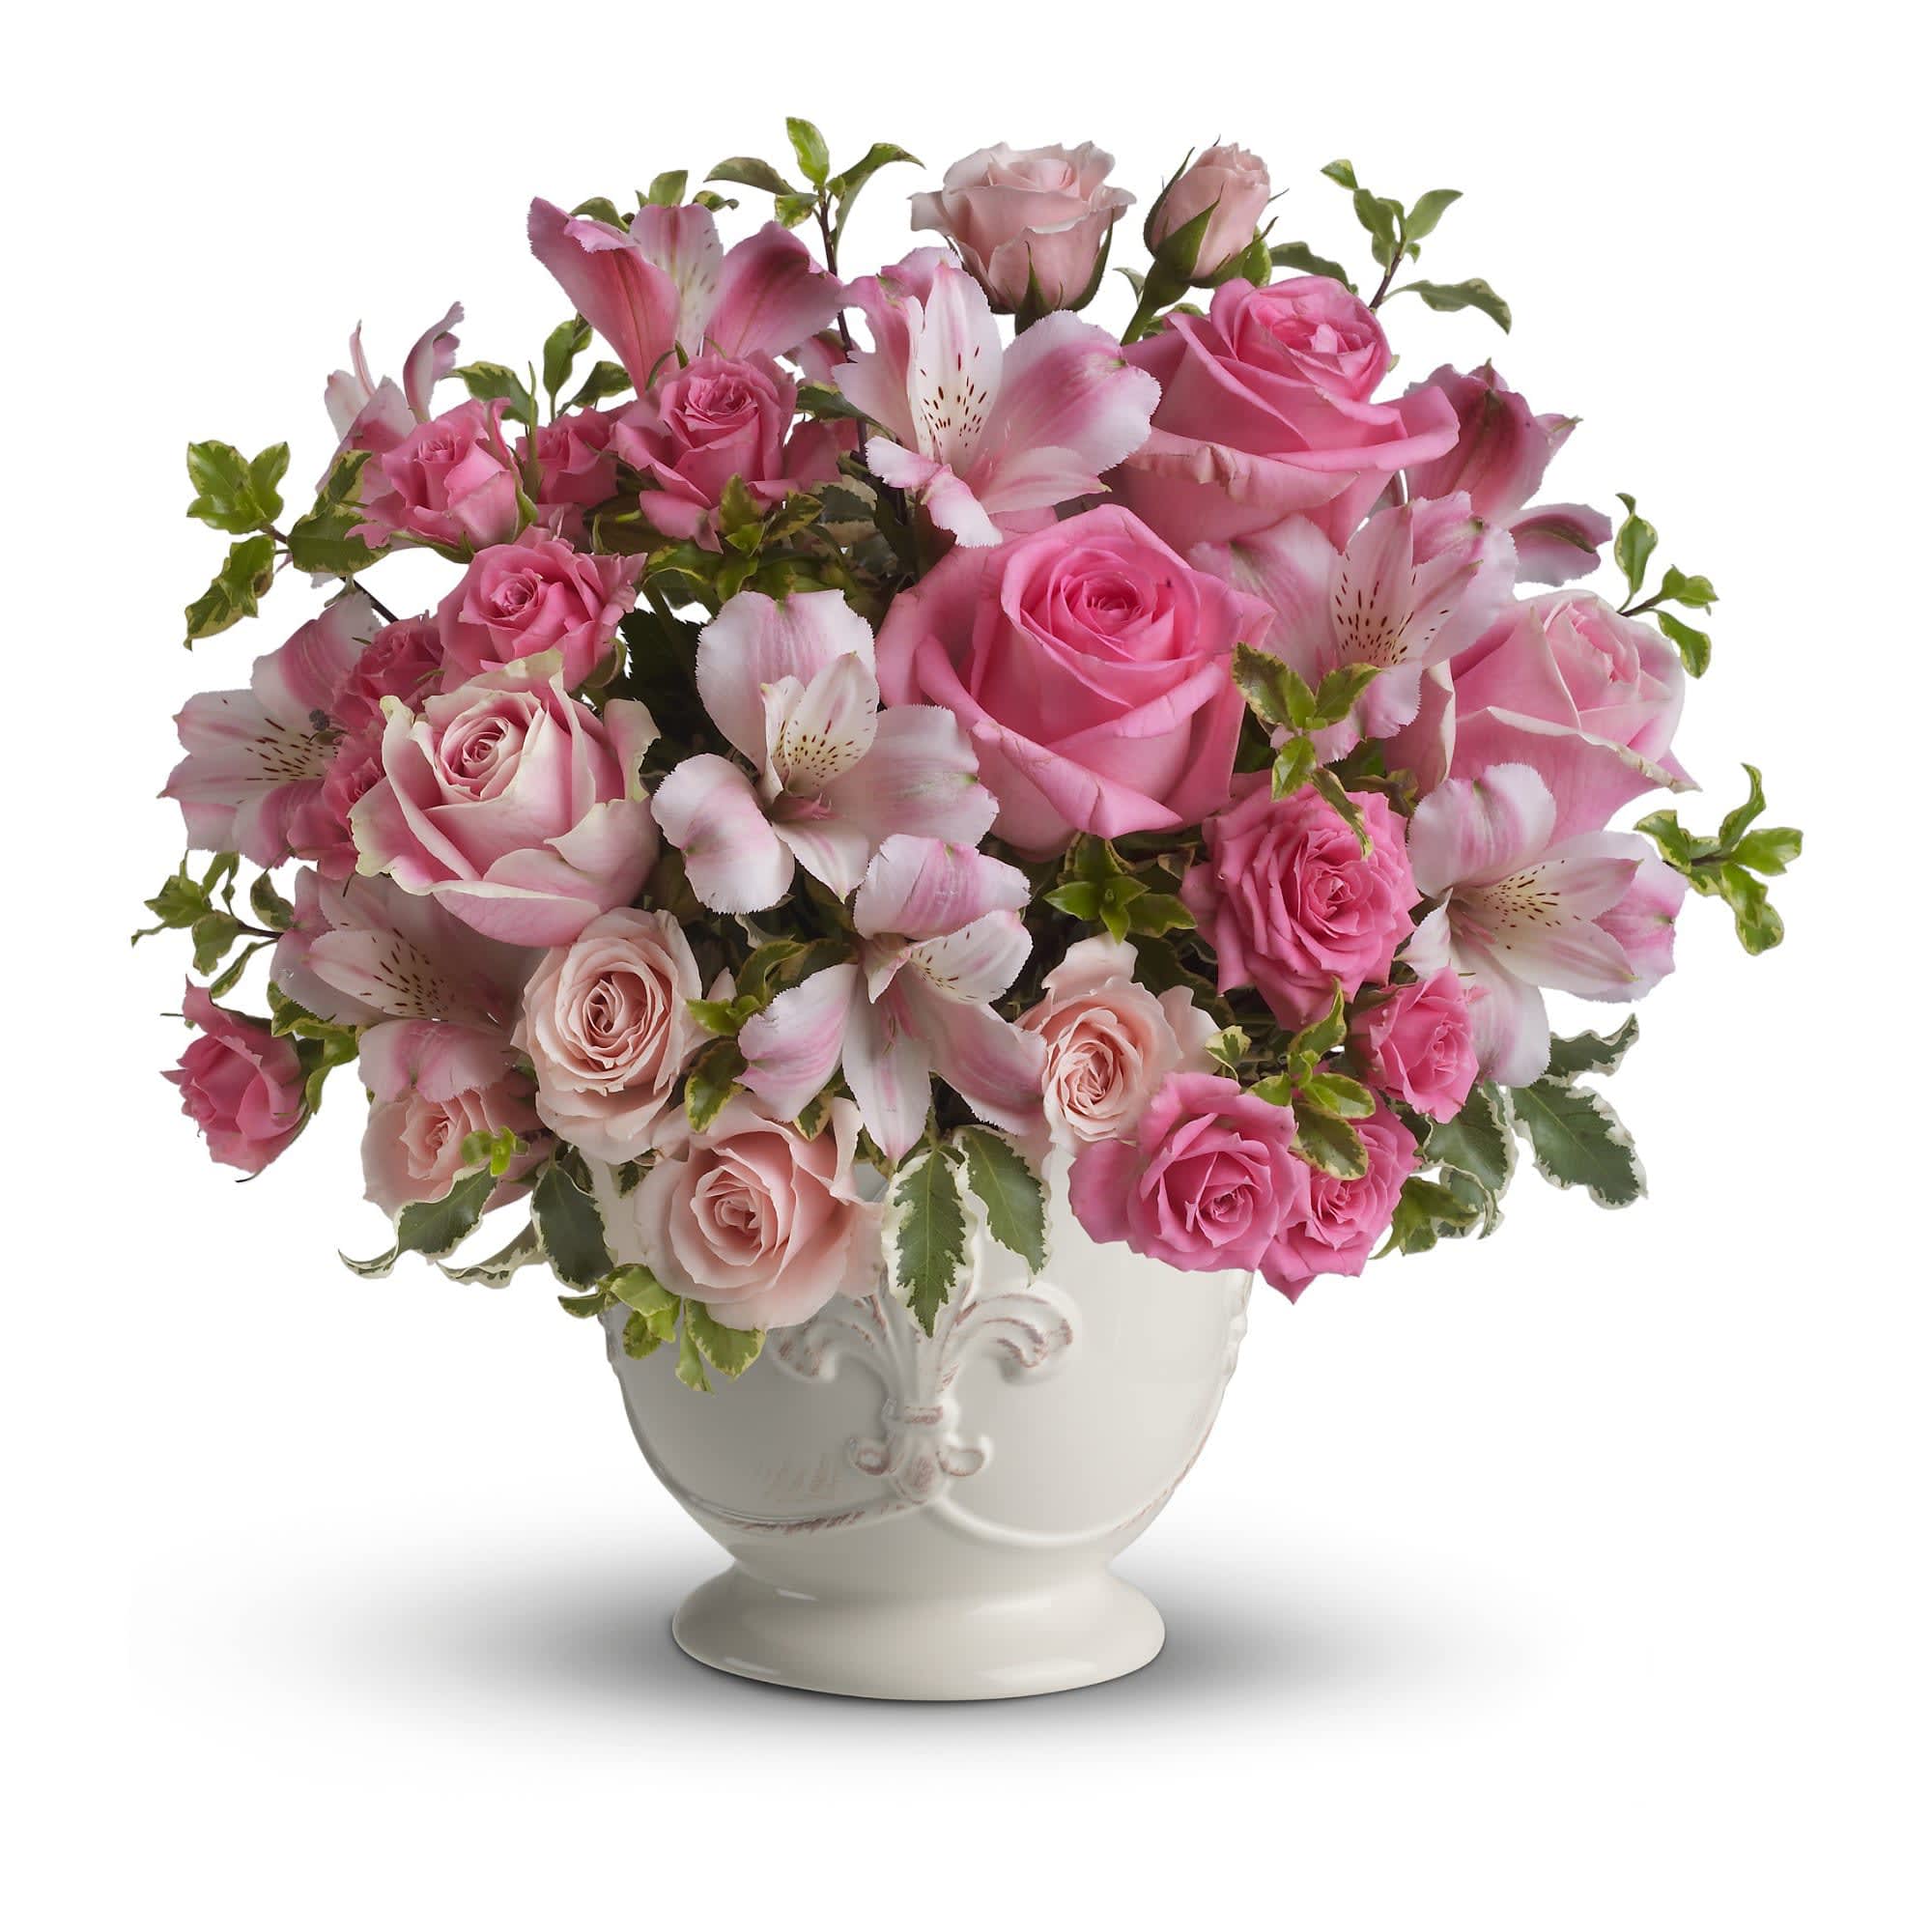 Teleflora's Pink Potpourri Bouquet with Roses - As strong as it is soft, the color pink as it is featured here creates a loving and utterly feminine tribute. Many shades of pink blossoms blend together for an effect that is beautifully subtle and sublime. 